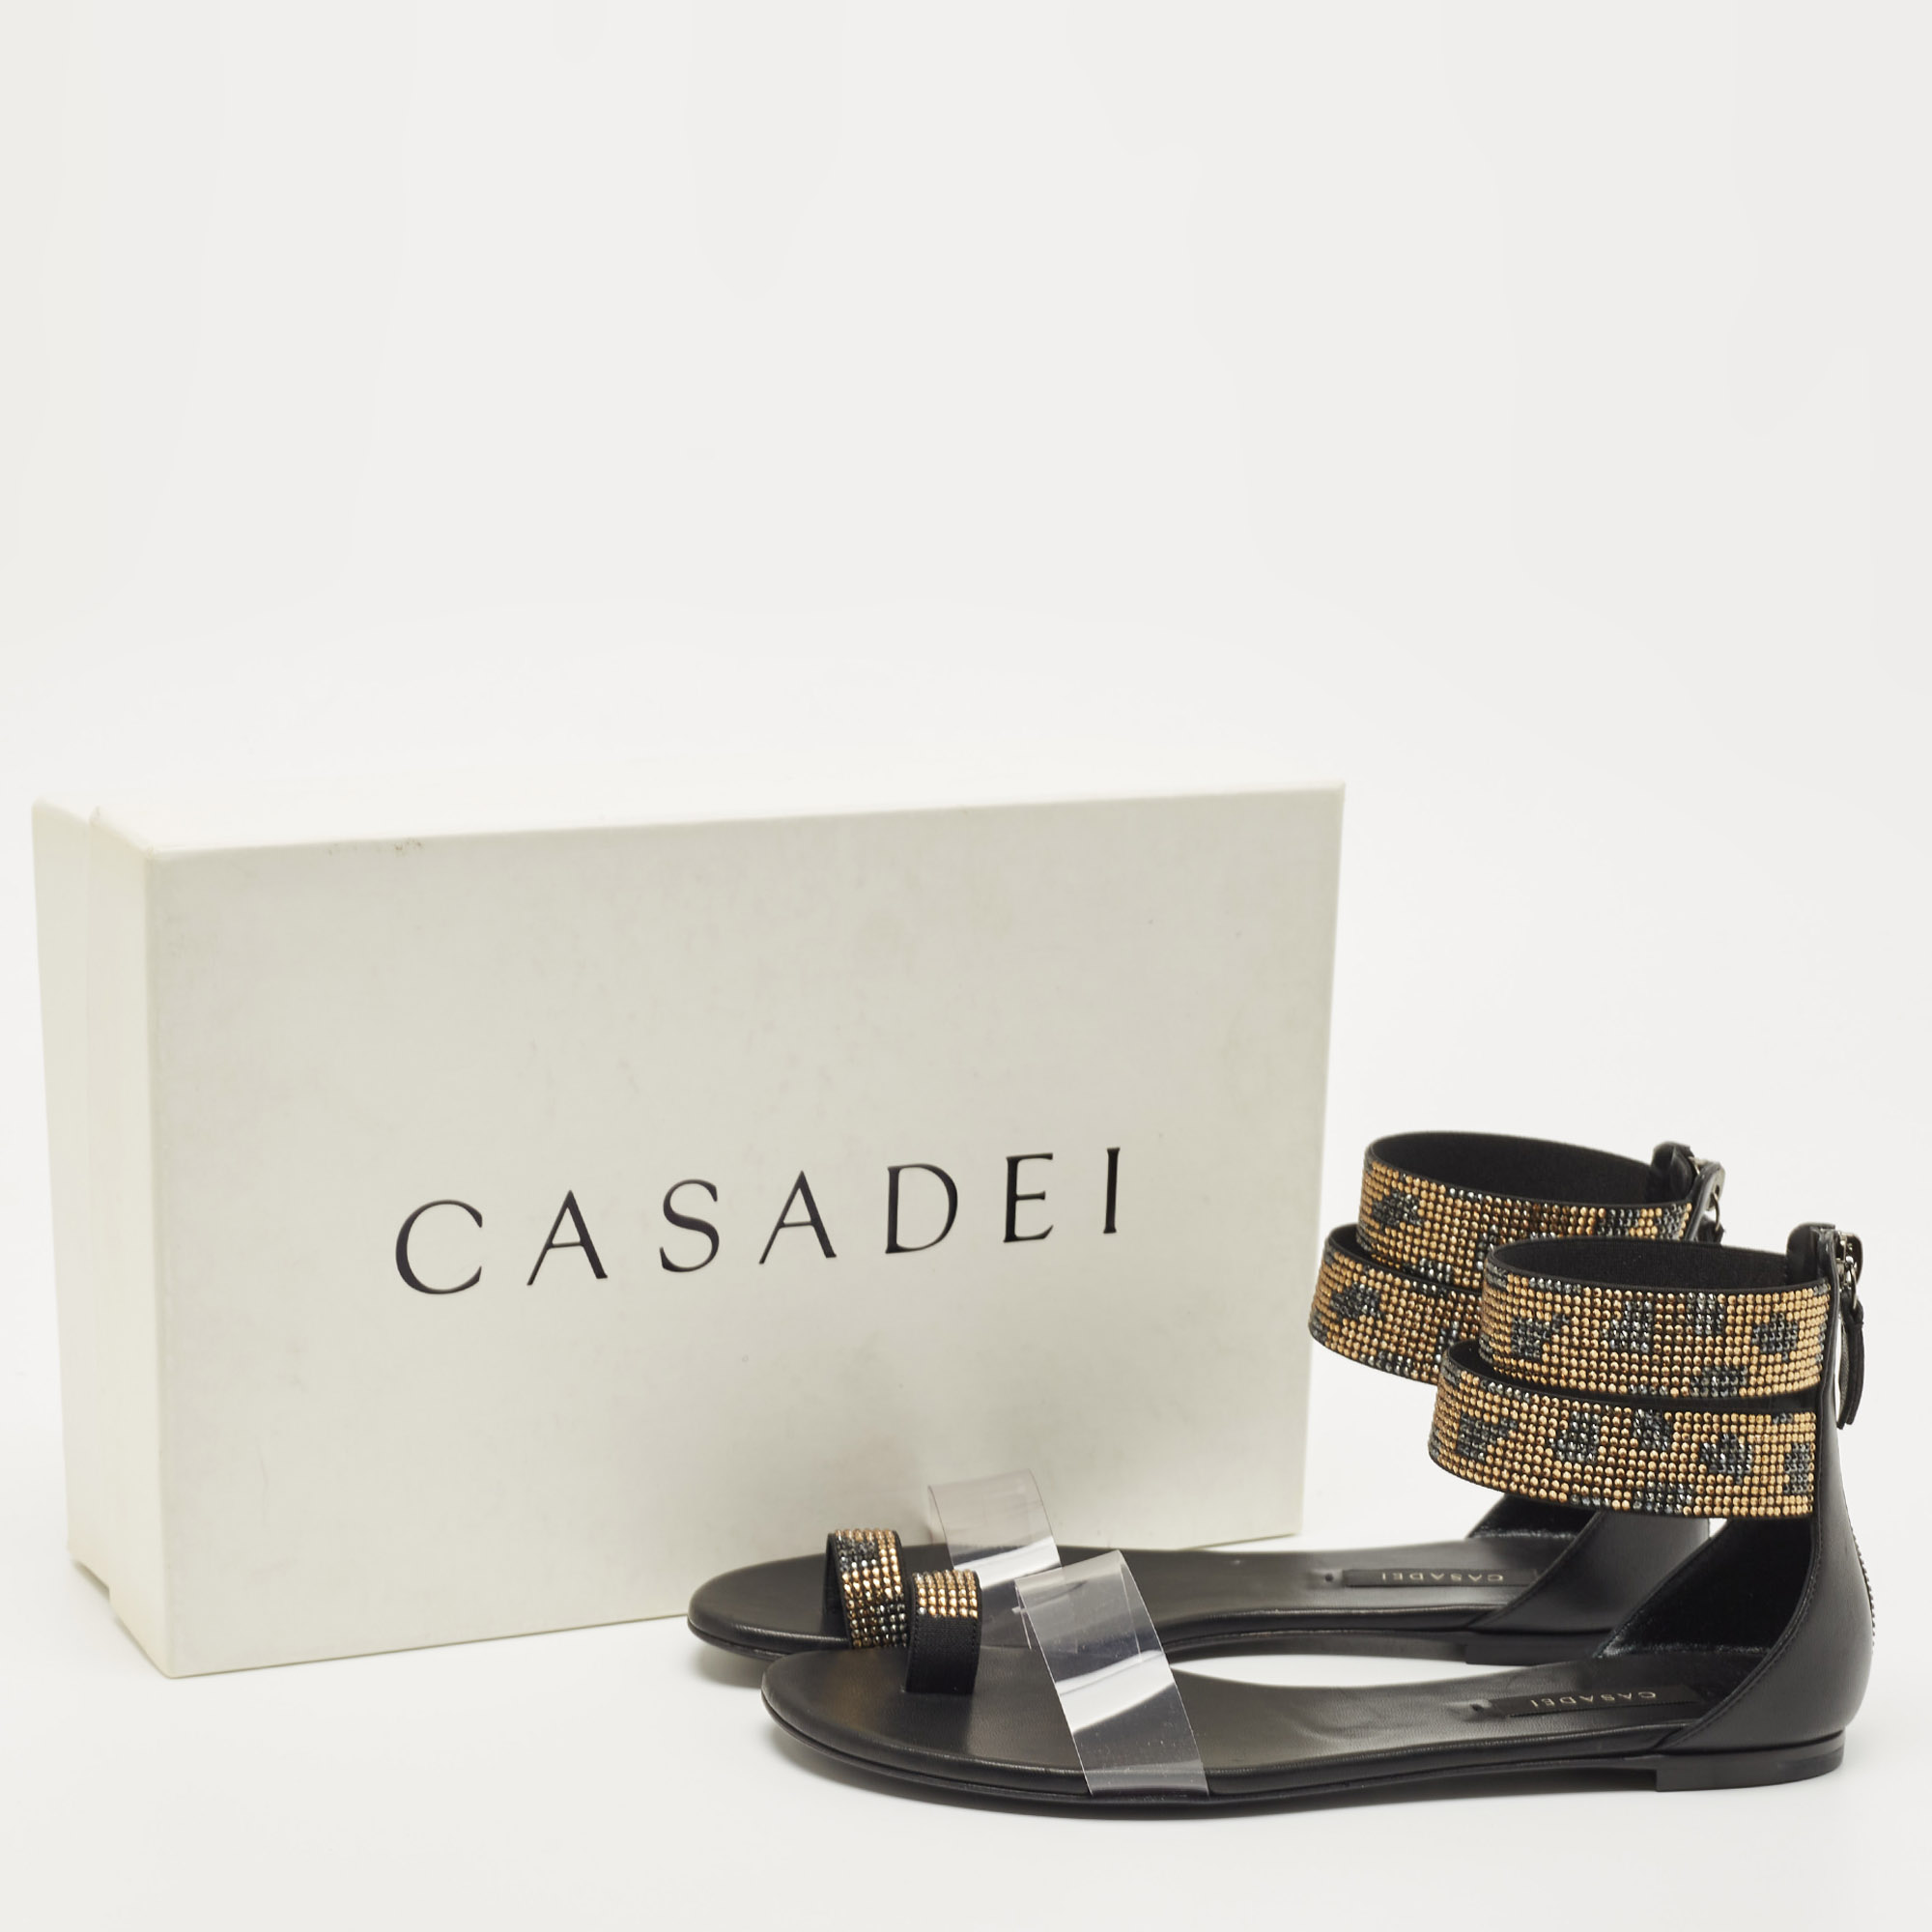 Casadei Black/Gold Crystals And PVC Ankle Cuff Flat Sandals Size 37